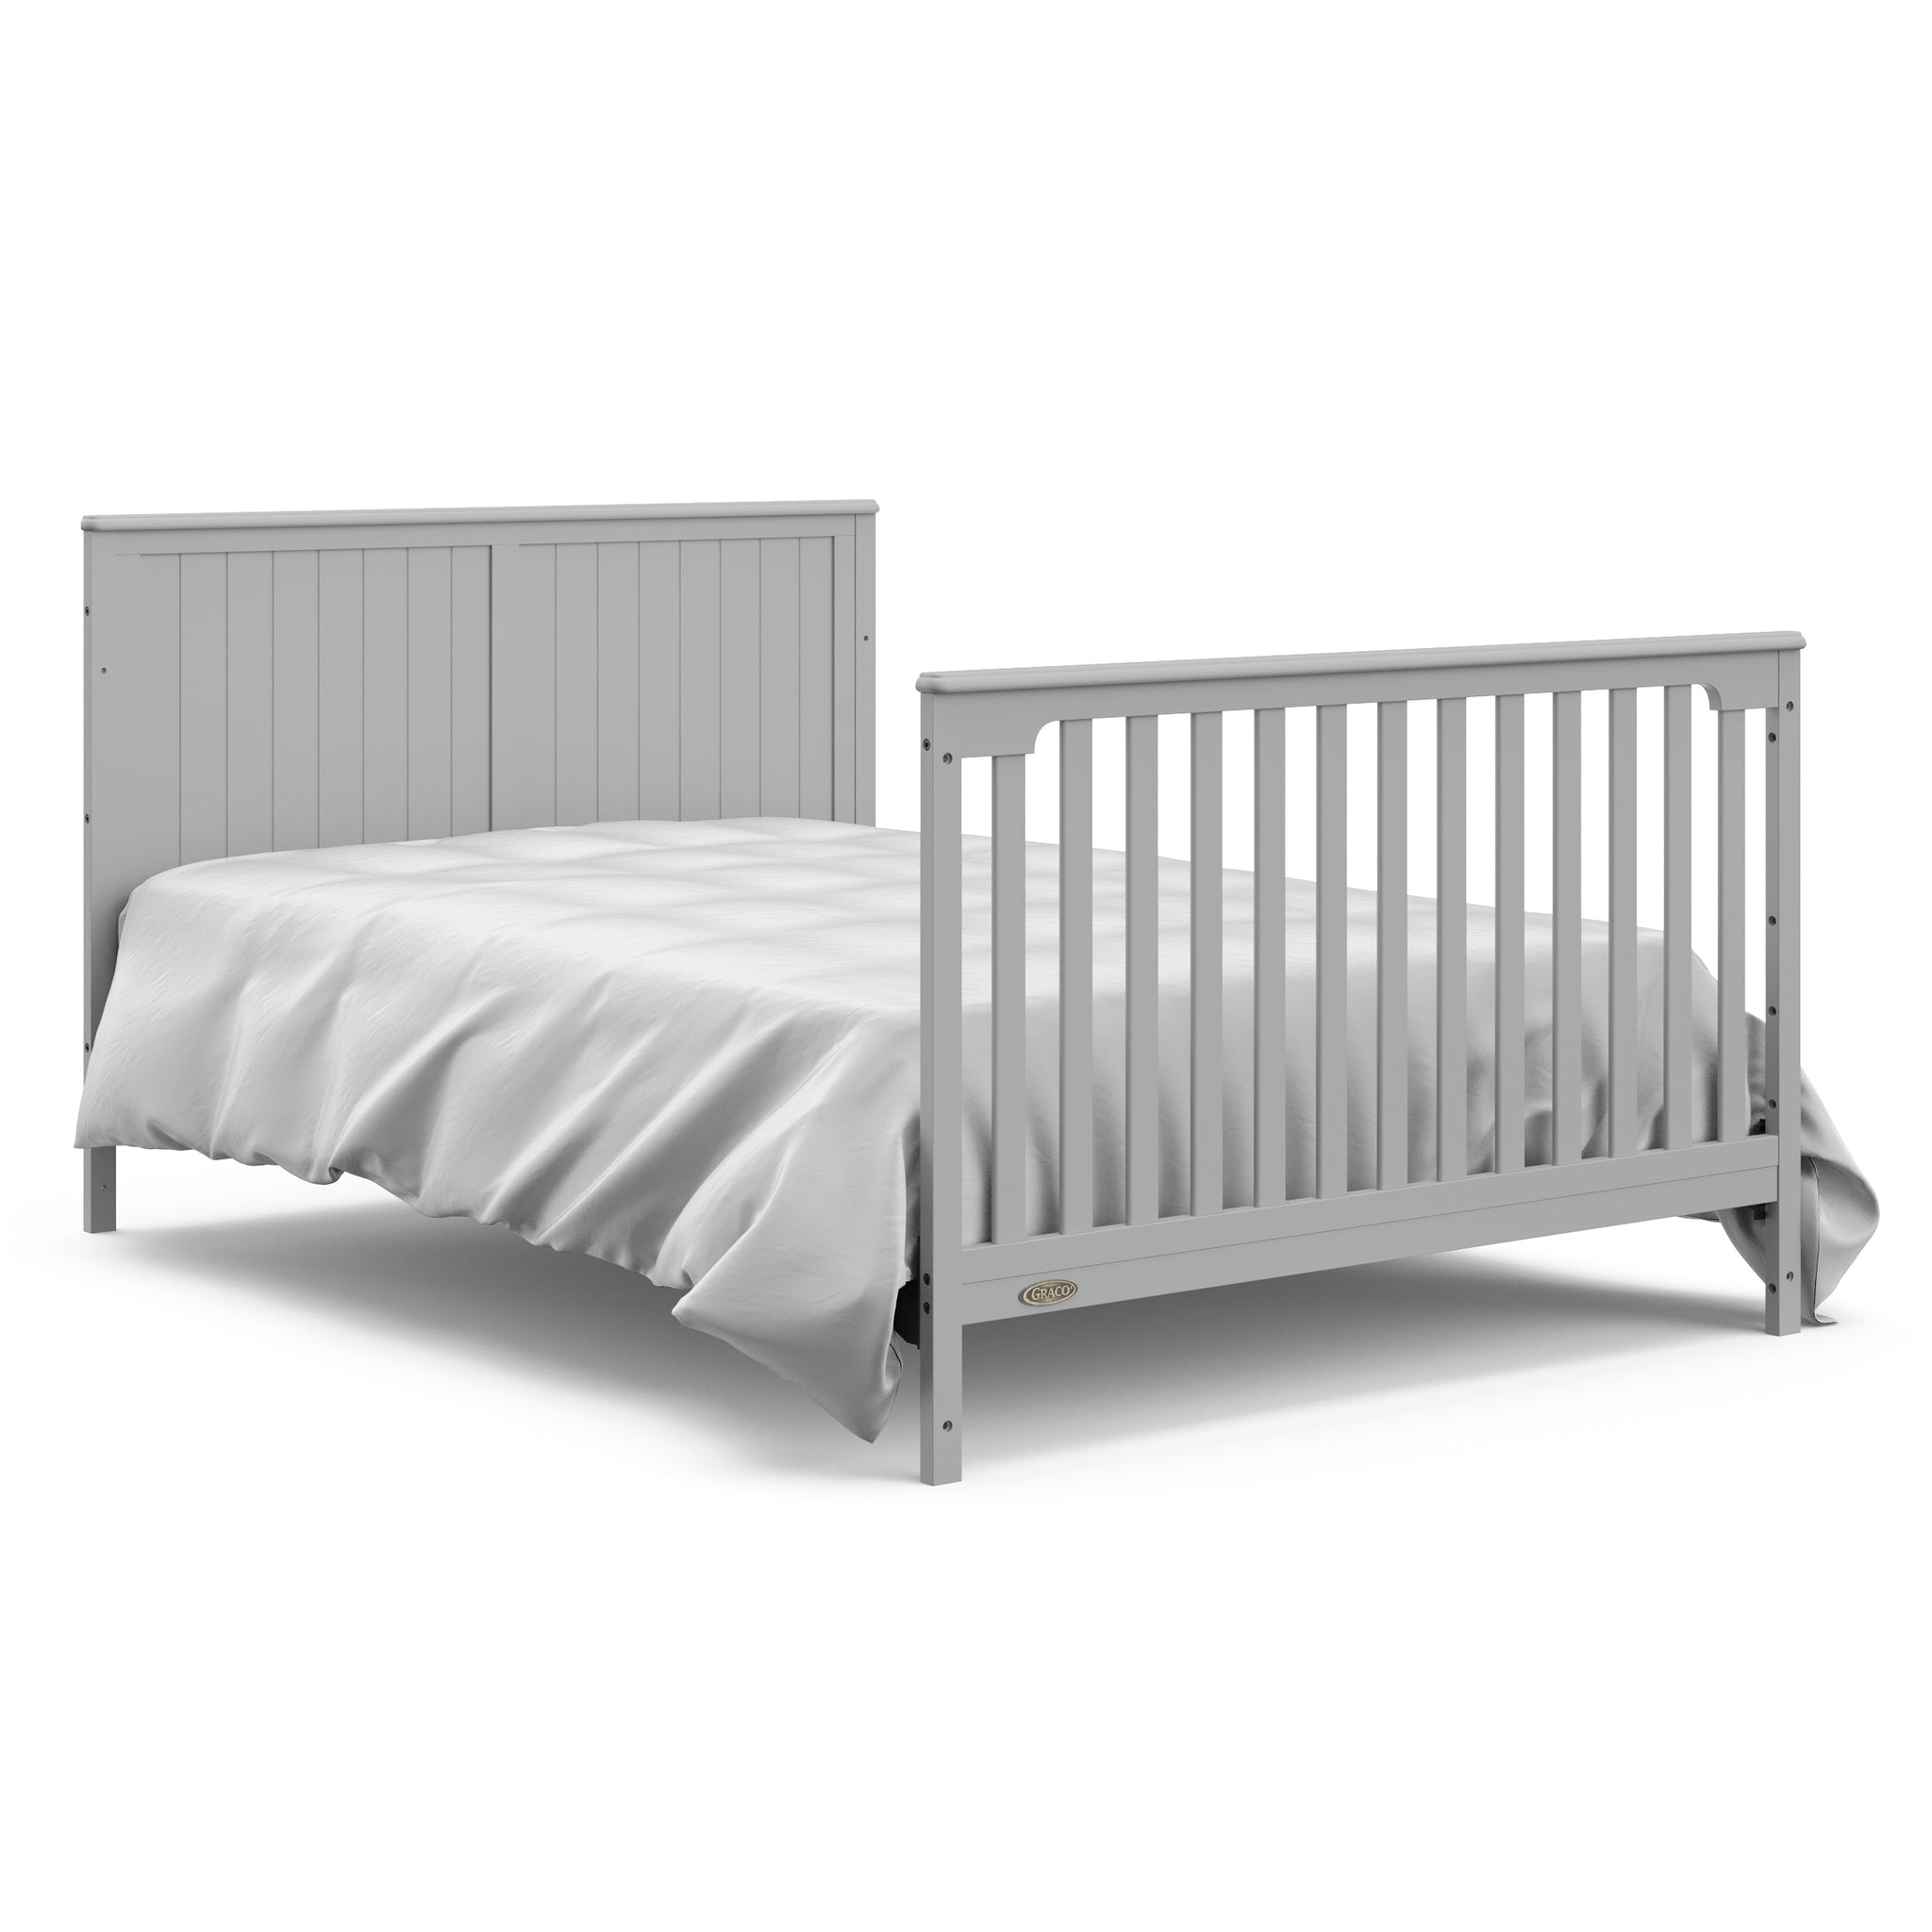 Pebble gray crib and changer with drawer in full-size bed with headboard and footboard conversion